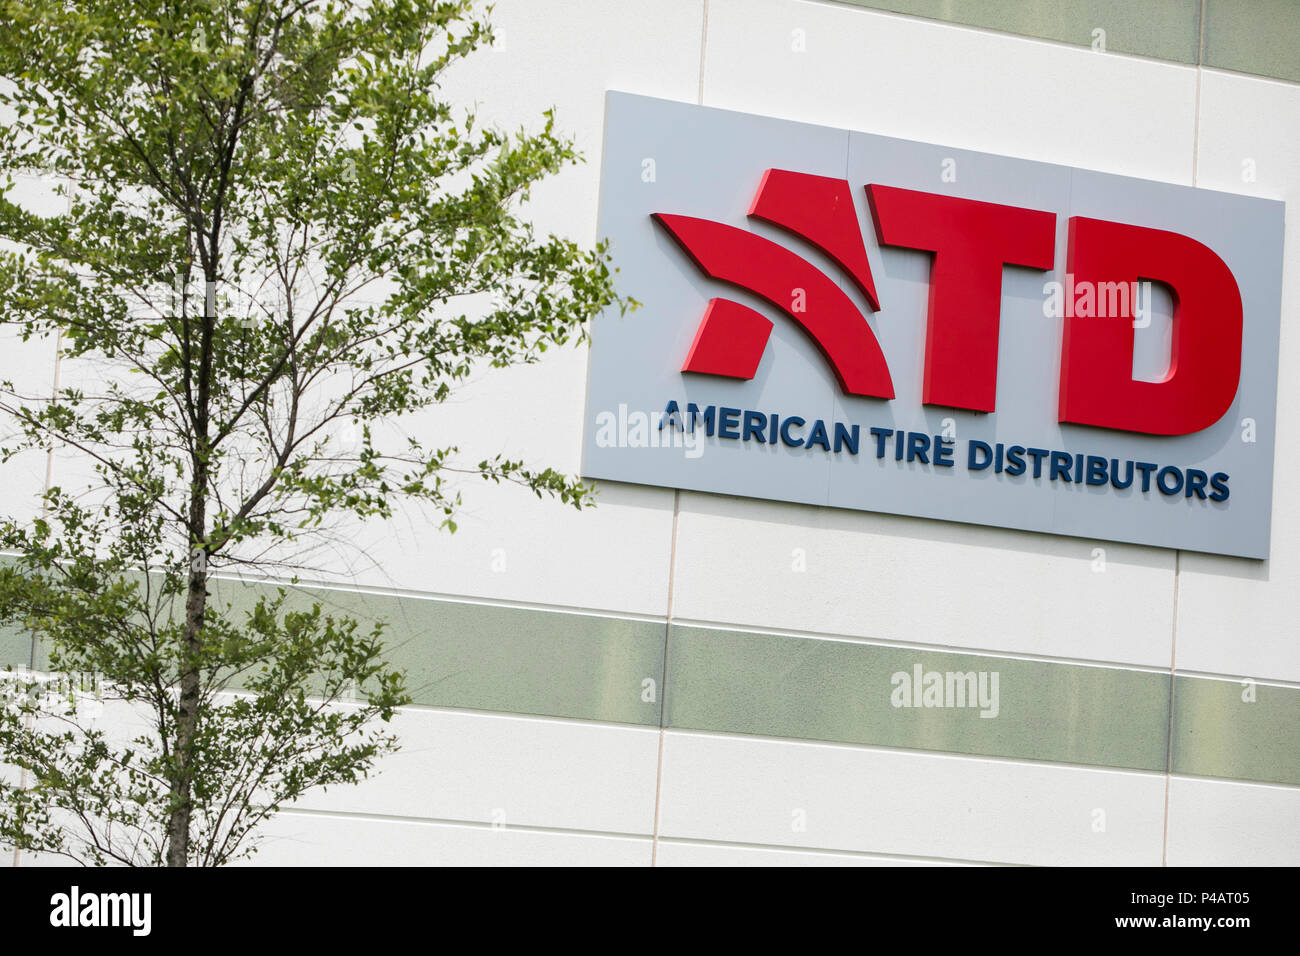 A logo sign outside of a facility occupied by American Tire Distributors (ATD) in Manassas, Virginia on June 9, 2018. Stock Photo